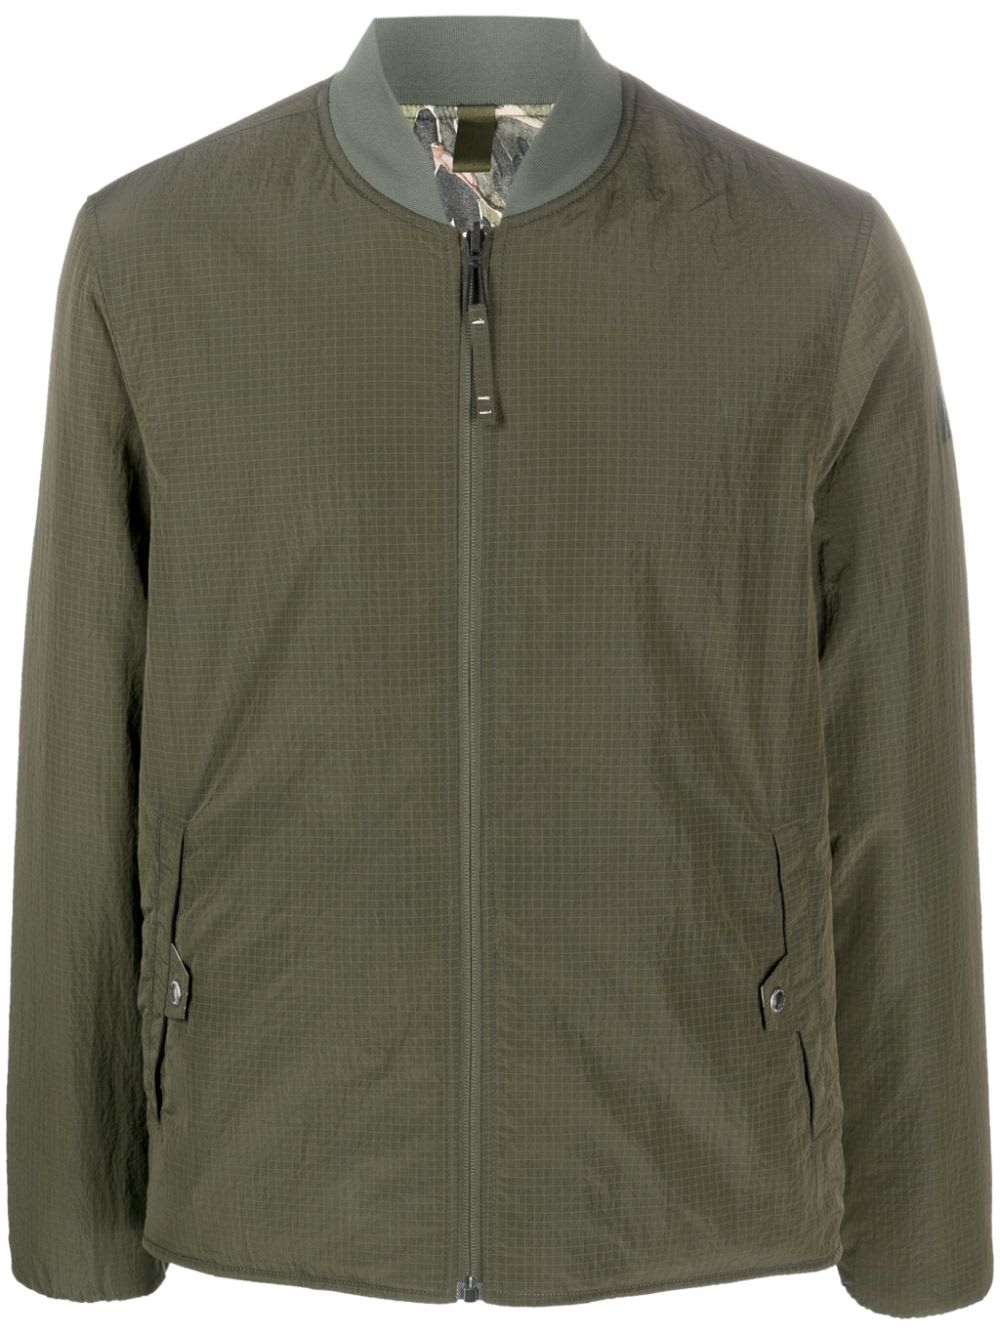 PS BY PAUL SMITH MENS WADDED REVERSIBLE BOMBER